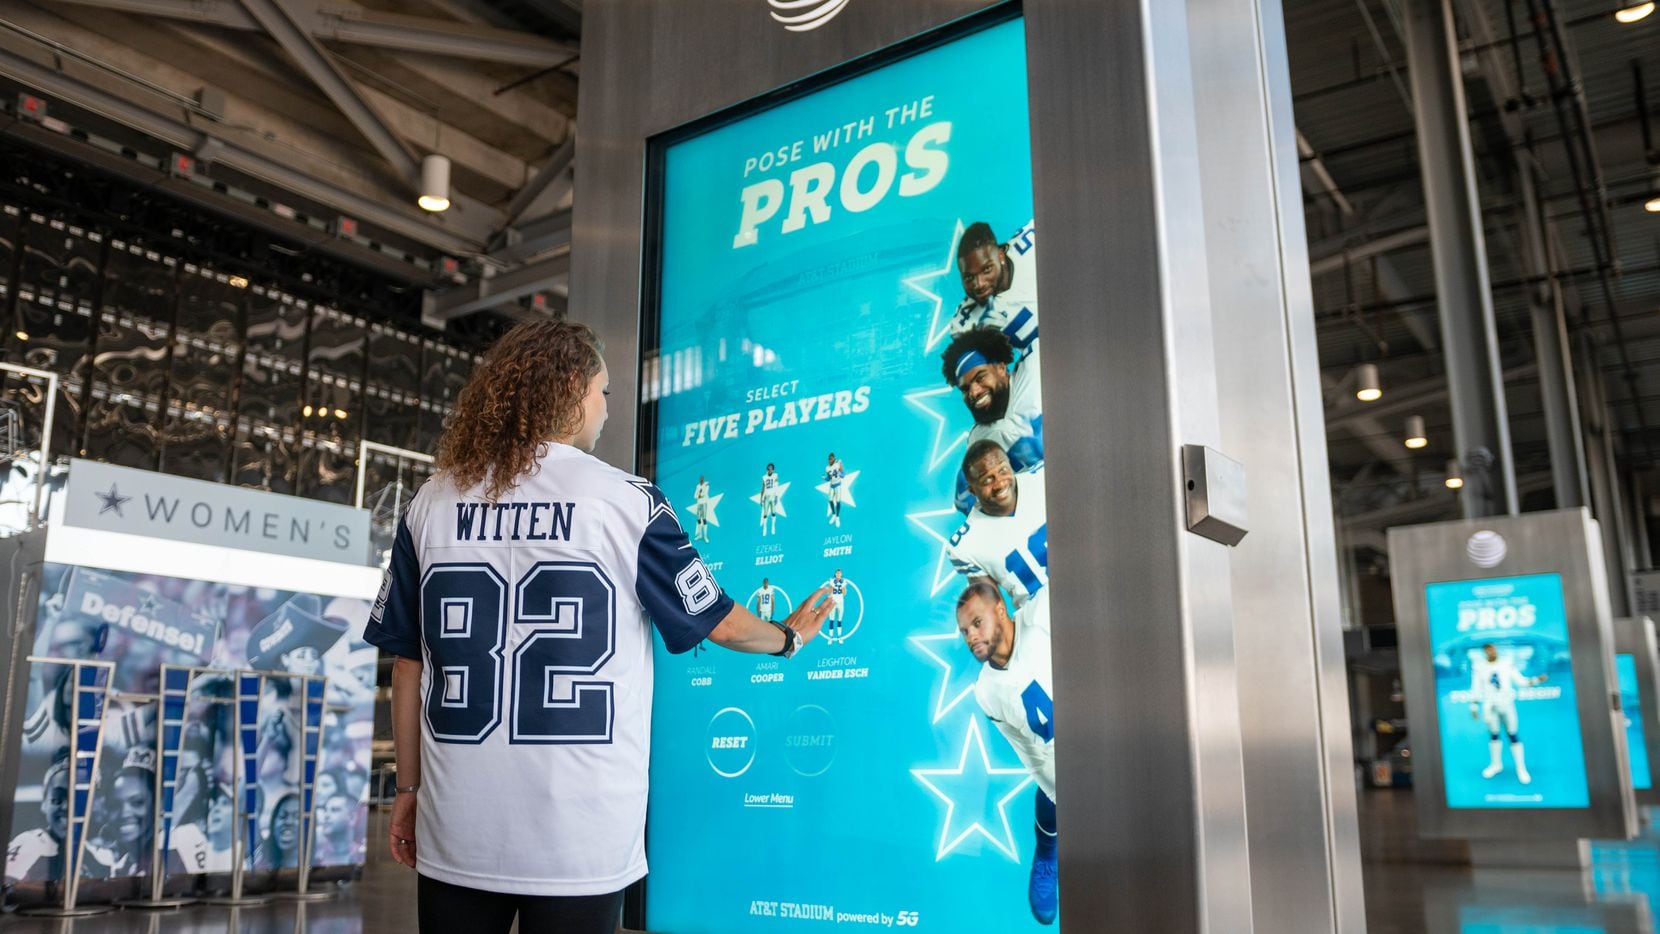 AT&T's Pose With The Pros experience at AT&T Stadium.